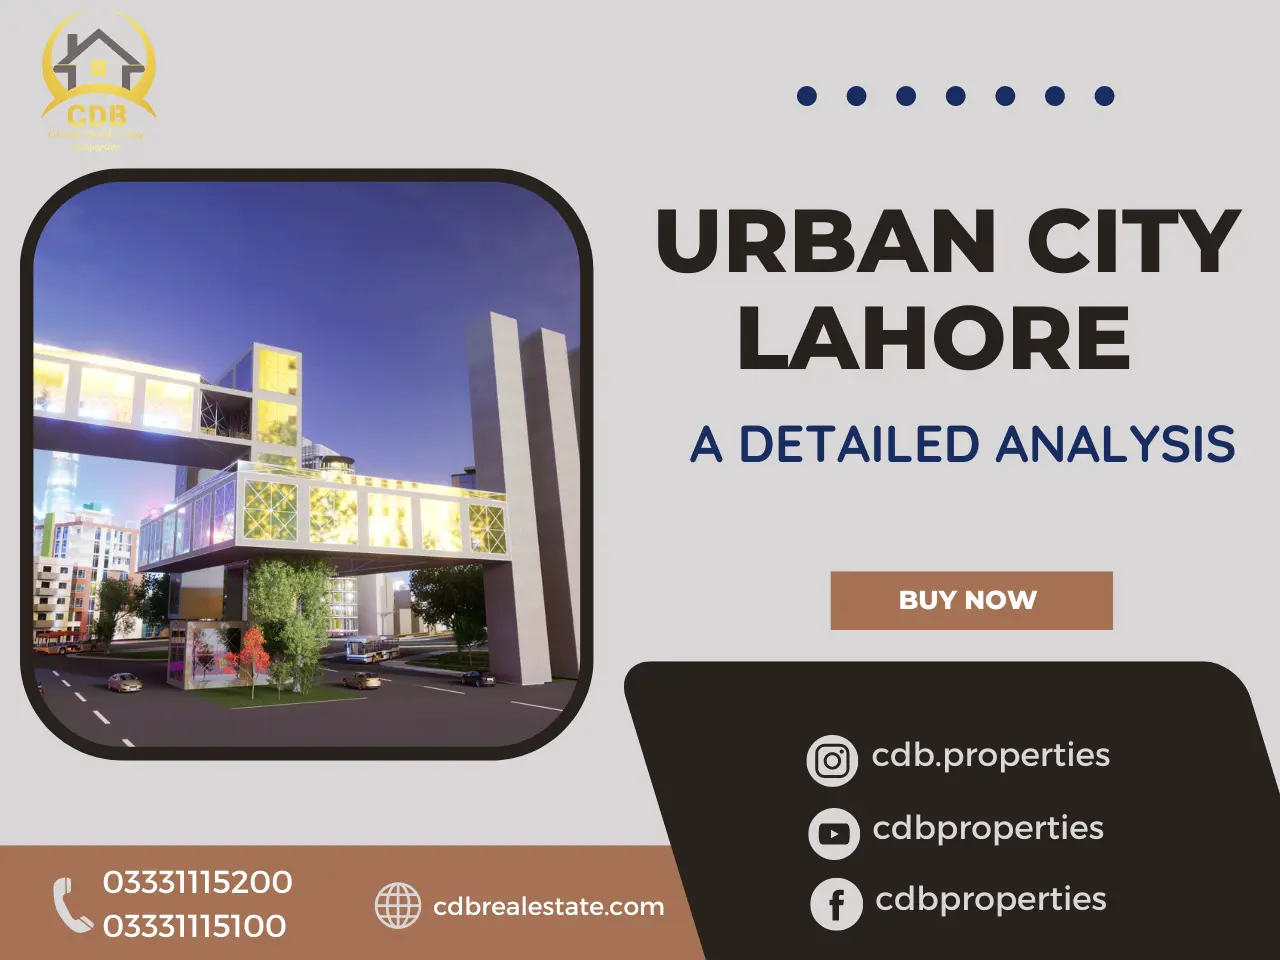 Urban City Lahore - A Detailed Analysis